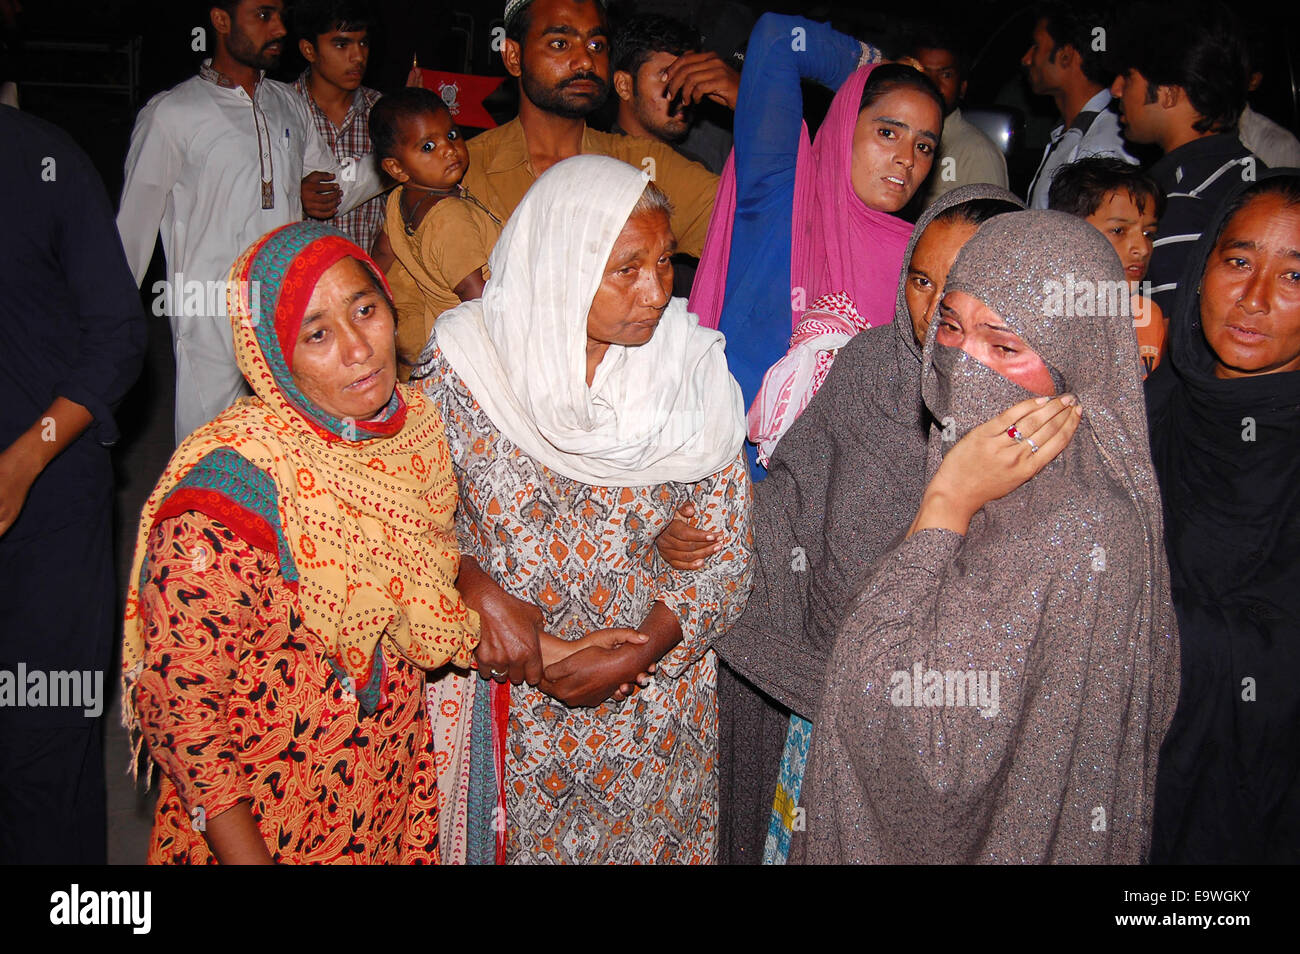 Lahore. 2nd Nov, 2014. People mourn over the death of their relatives at a hospital in eastern Pakistan's Lahore, Nov. 2, 2014. At least 55 people were killed and 118 others injured in a suicide blast that took place near Wagah crossing point at Pak-India border in Pakistan's eastern city of Lahore on Sunday evening, police officials said. © Jamil Ahmed/Xinhua/Alamy Live News Stock Photo